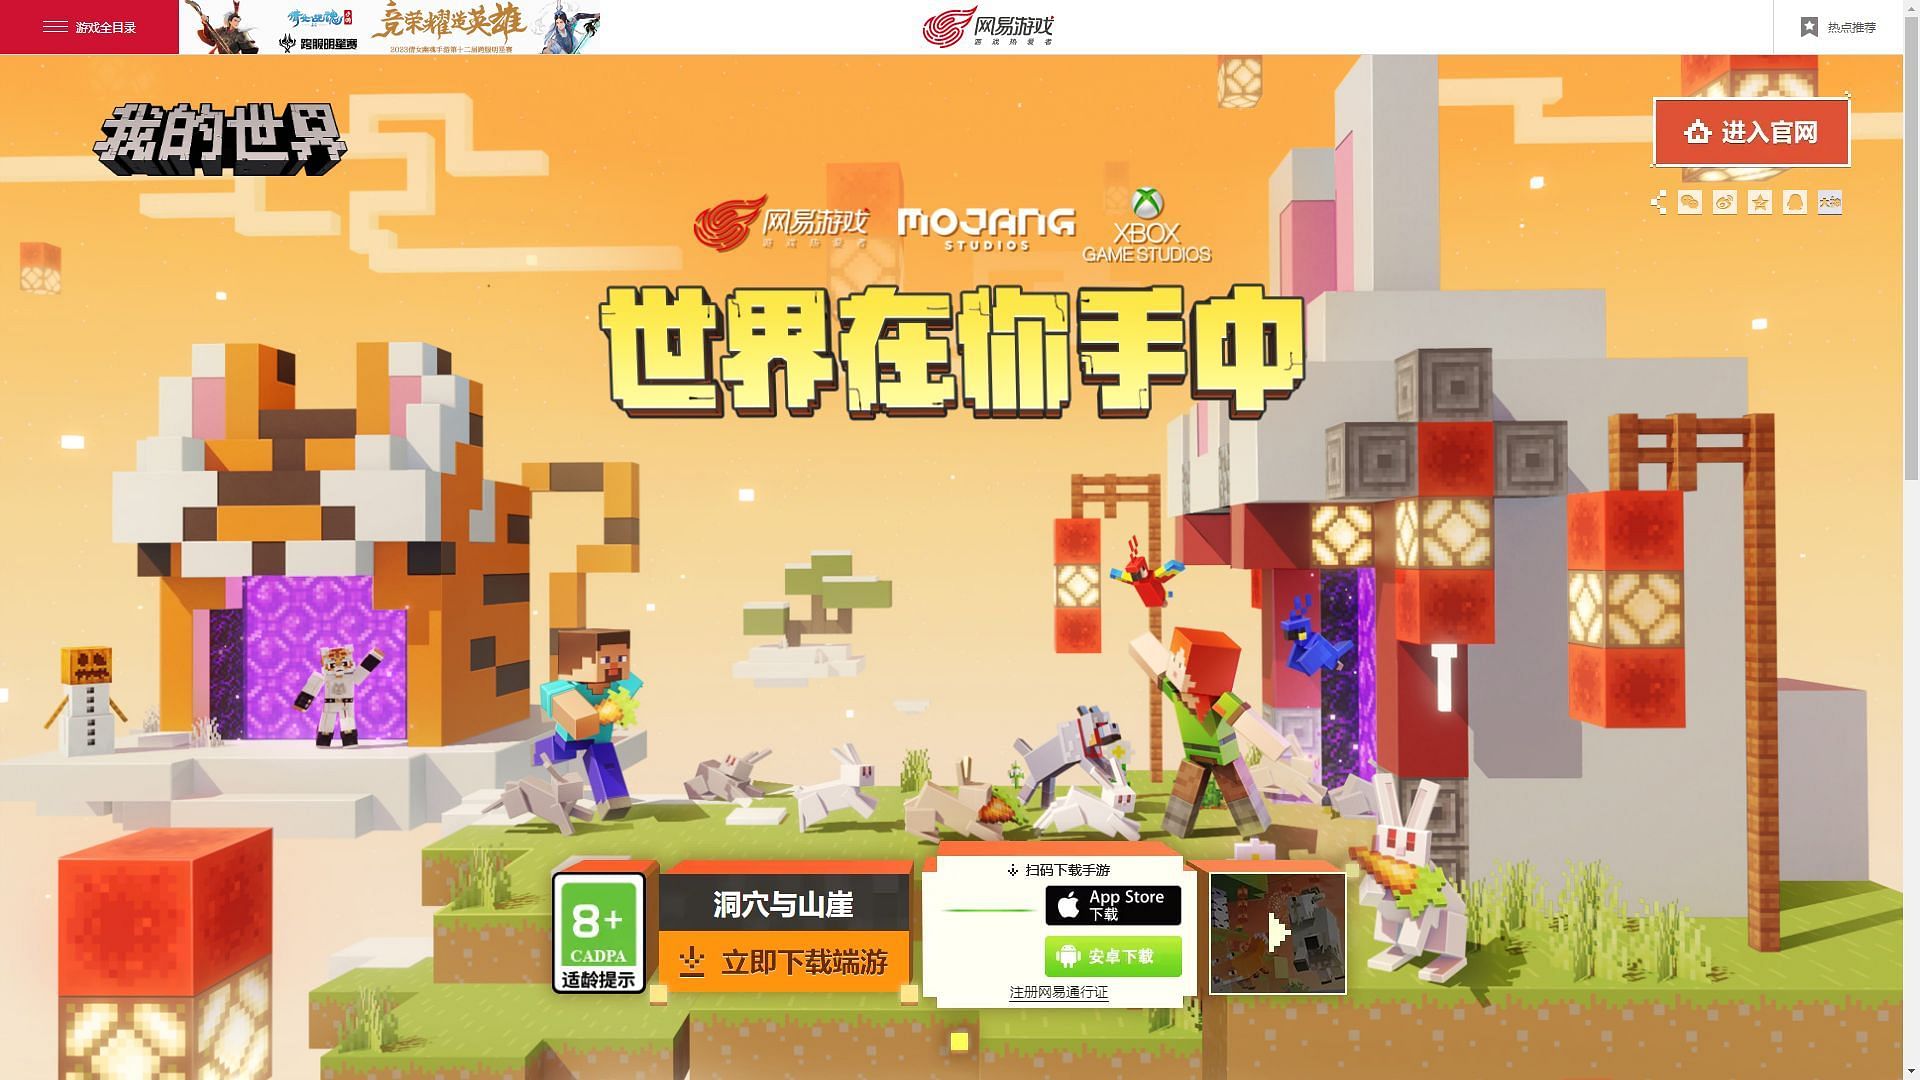 Minecraft is coming to China